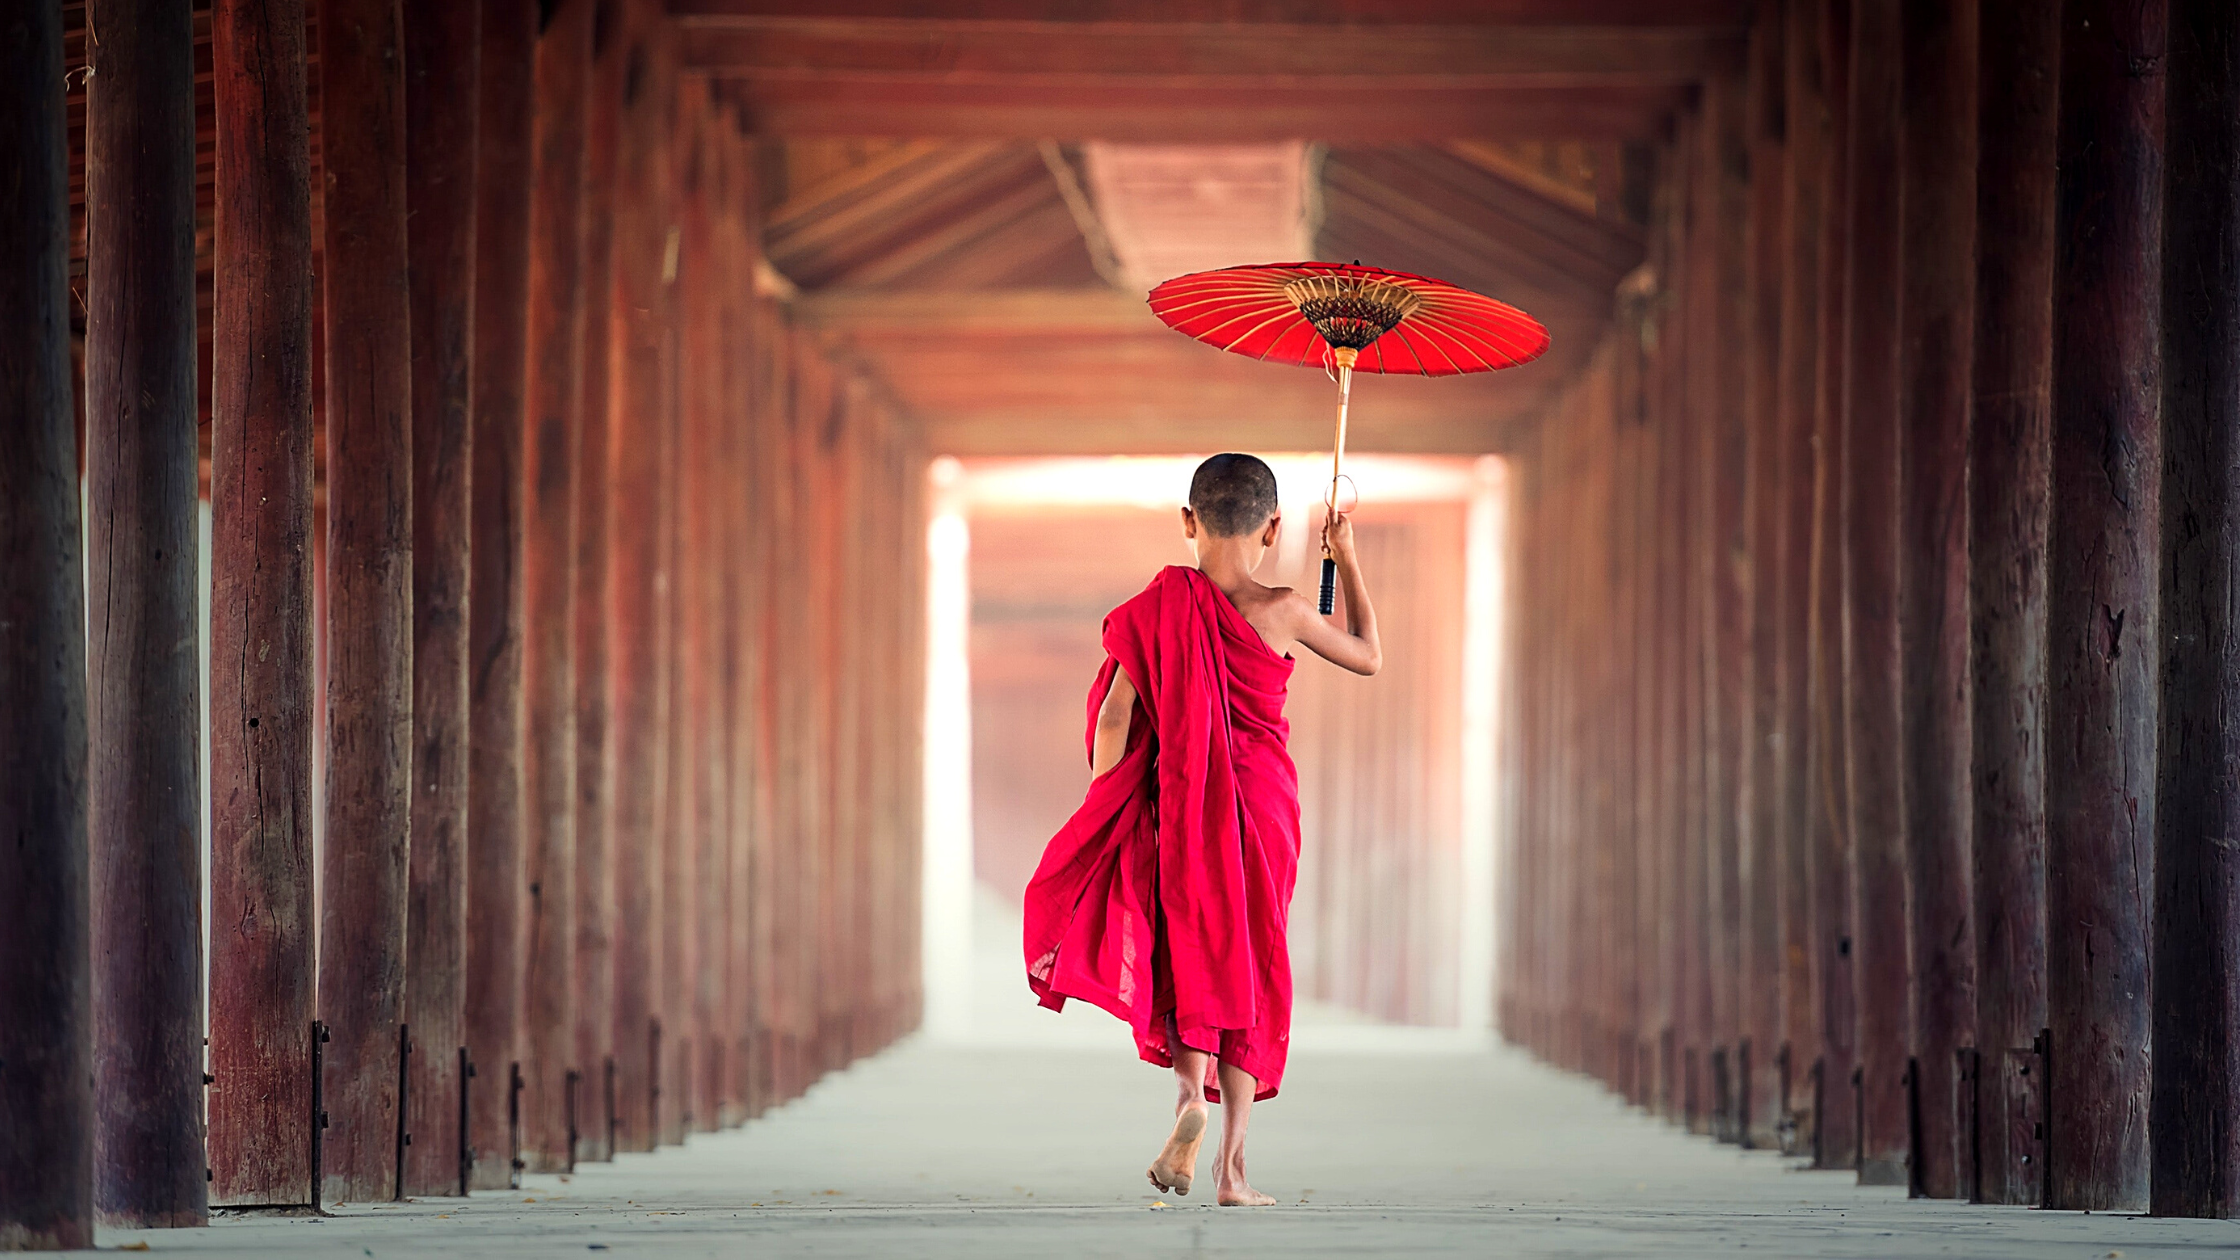 Young monk in red robes with a red umbrella, walking barefoot towards a brightly lit open door